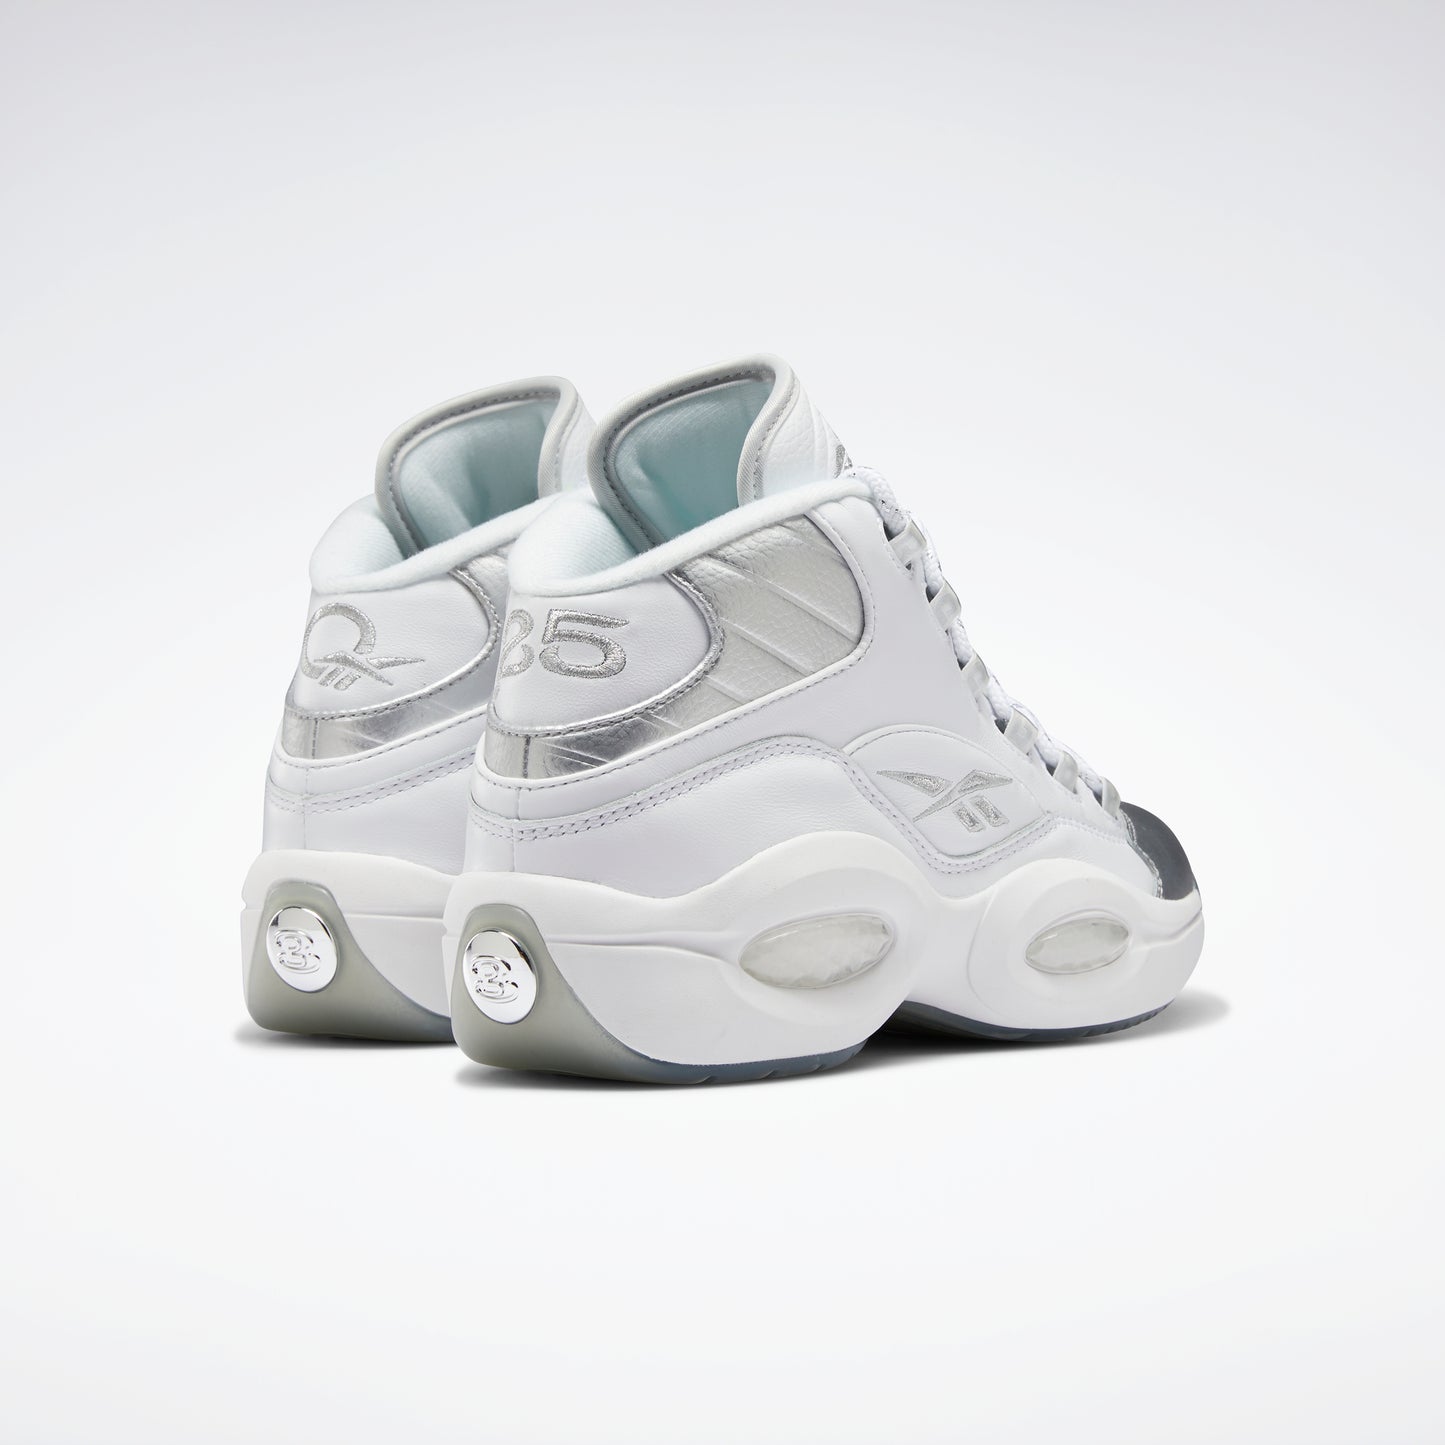 Chaussures Reebok Footwear Hommes Question Mid Chaussures Ftwwht/Ftwwht/Silvmt